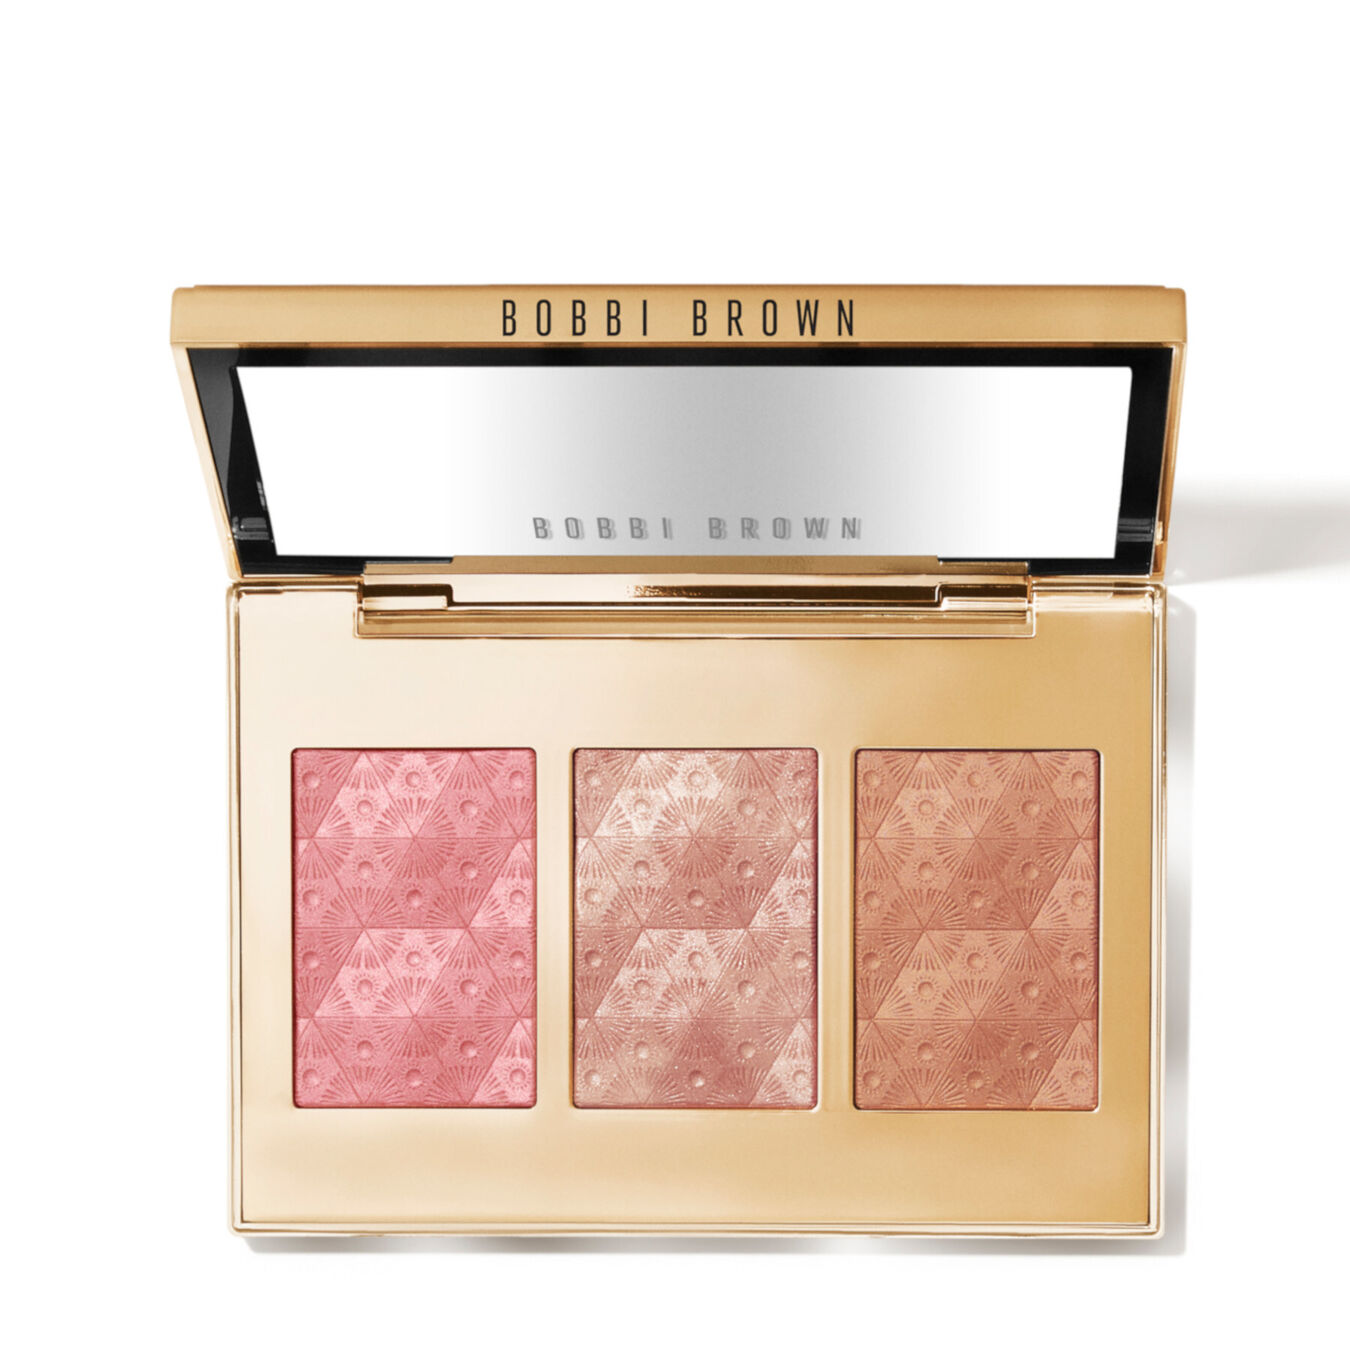 Bobbi Brown Luxe Cheek & Highlighting Palette Golden Glamour Collection 1pce